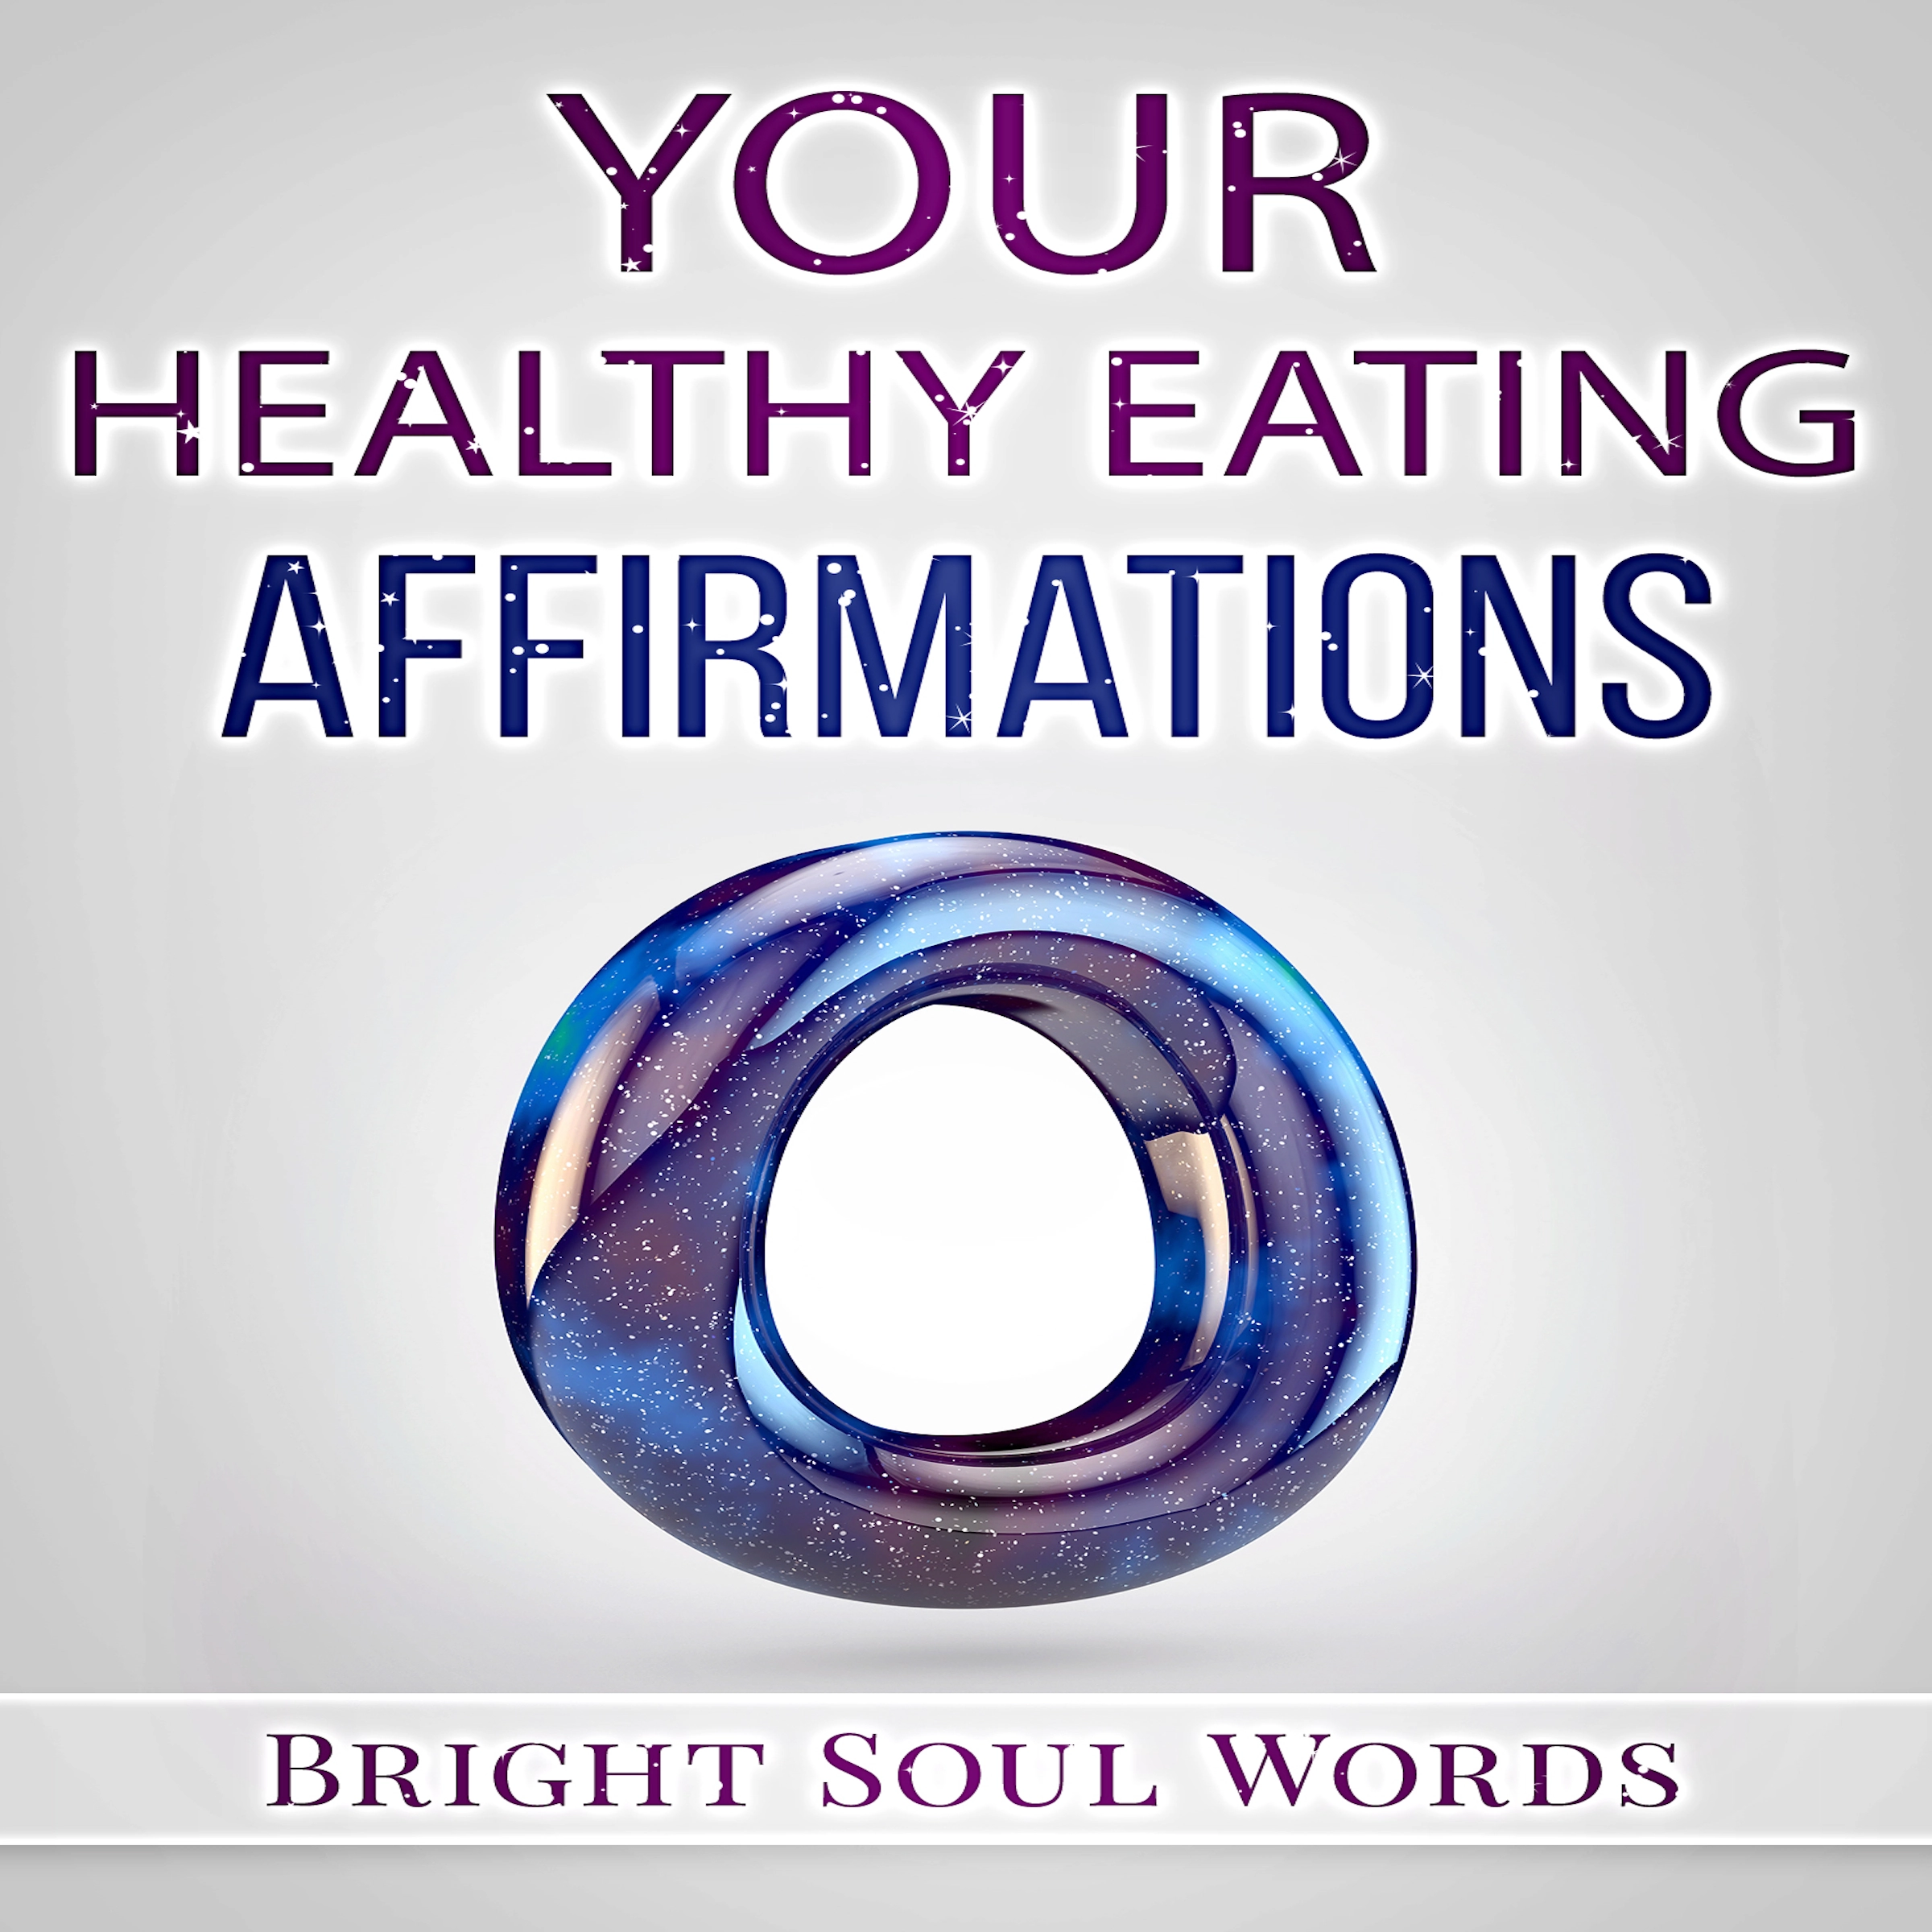 Your Healthy Eating Affirmations Audiobook by Bright Soul Words